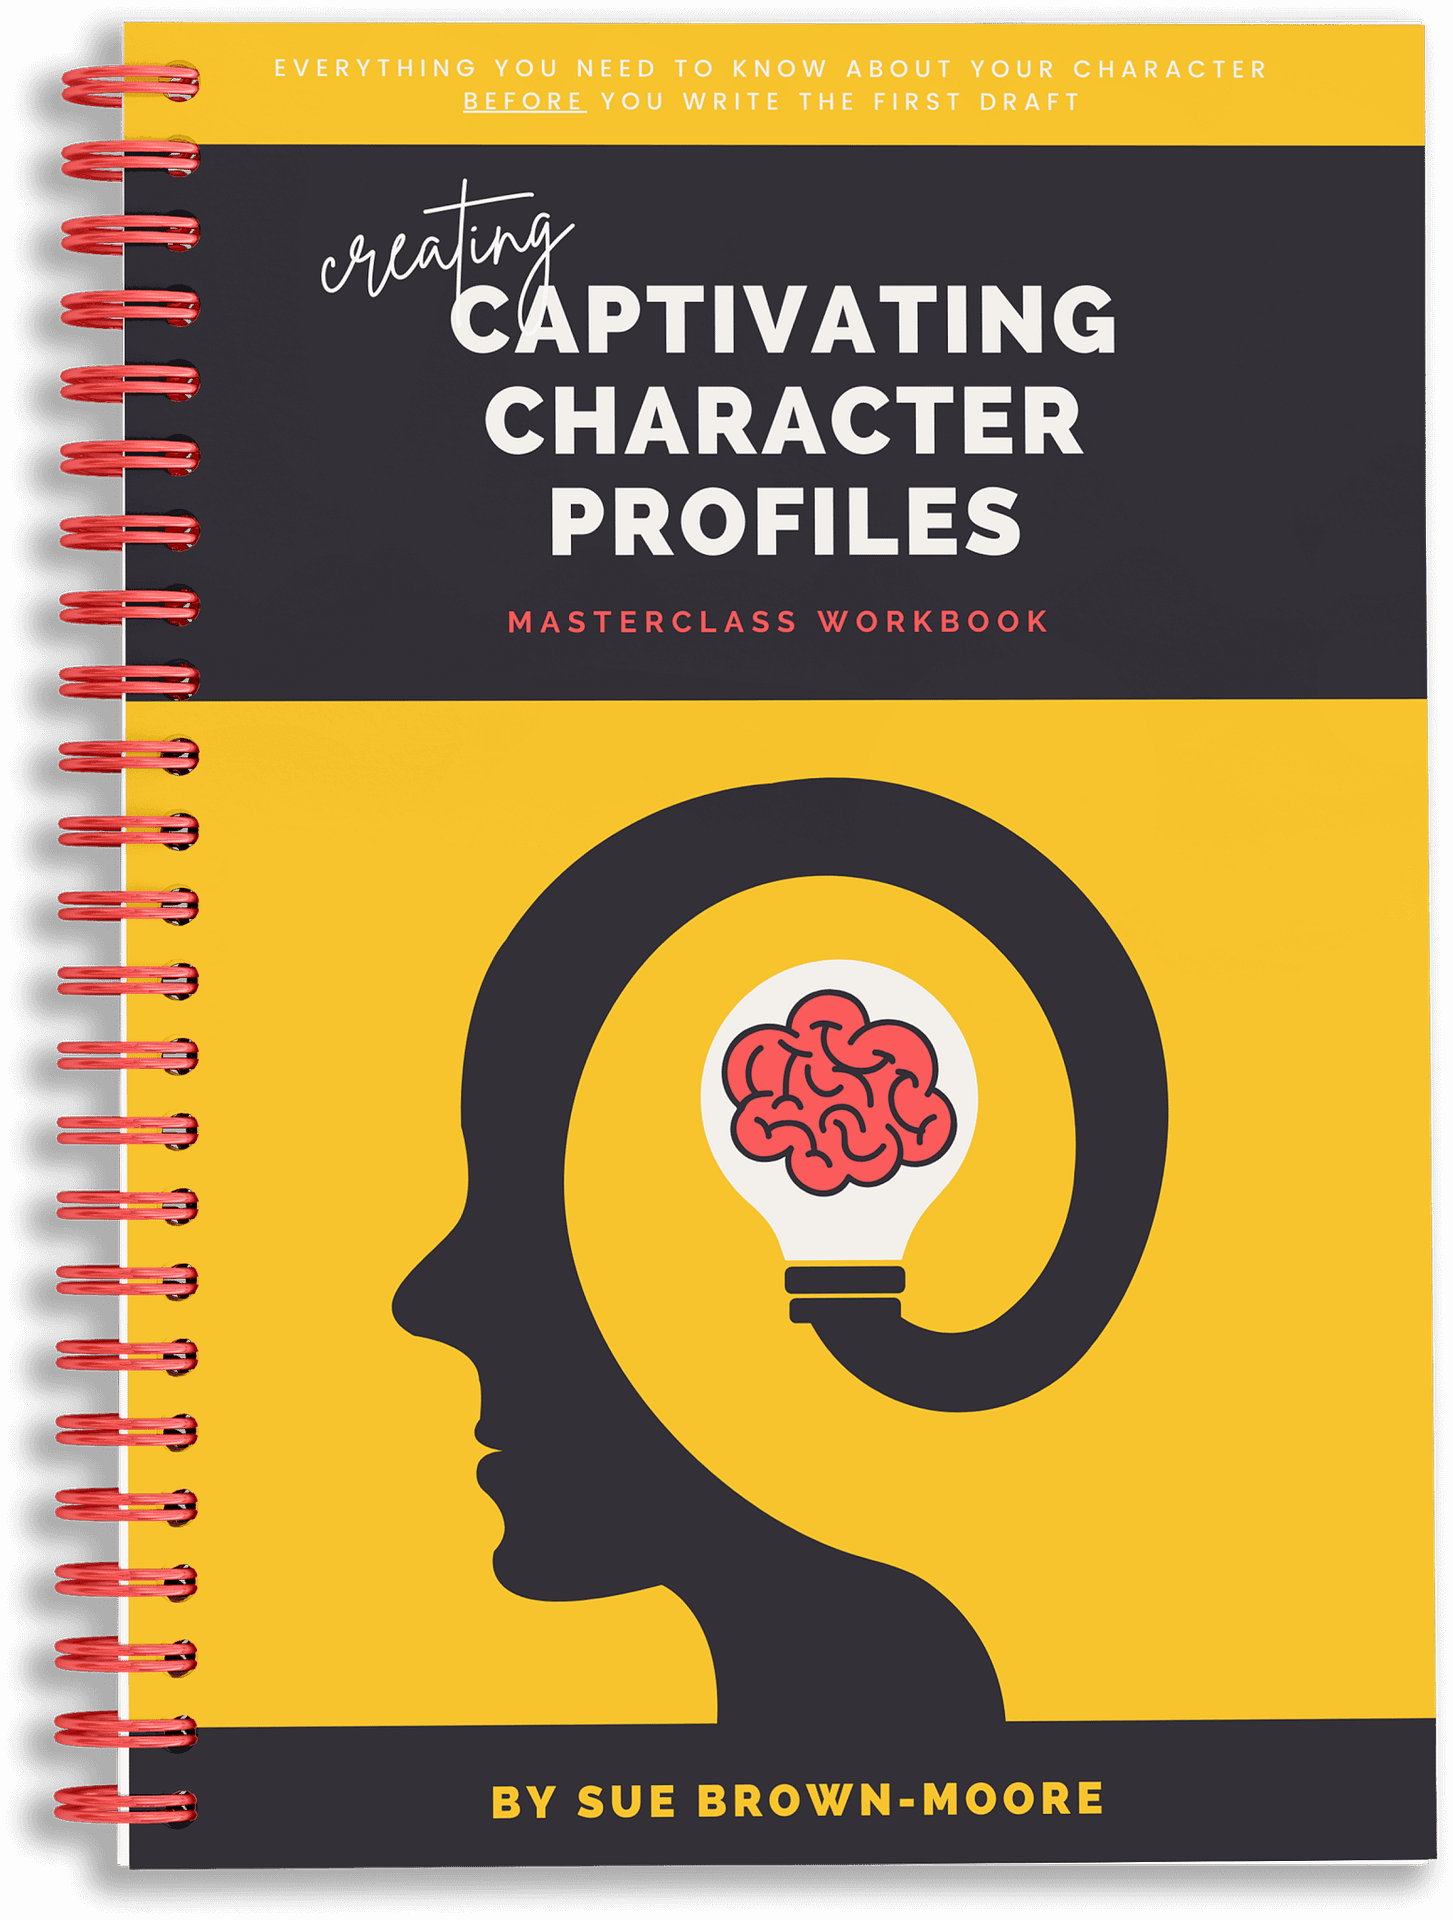 Workbook and course: Creating Captivating Character Profiles by Sue Brown-Moore